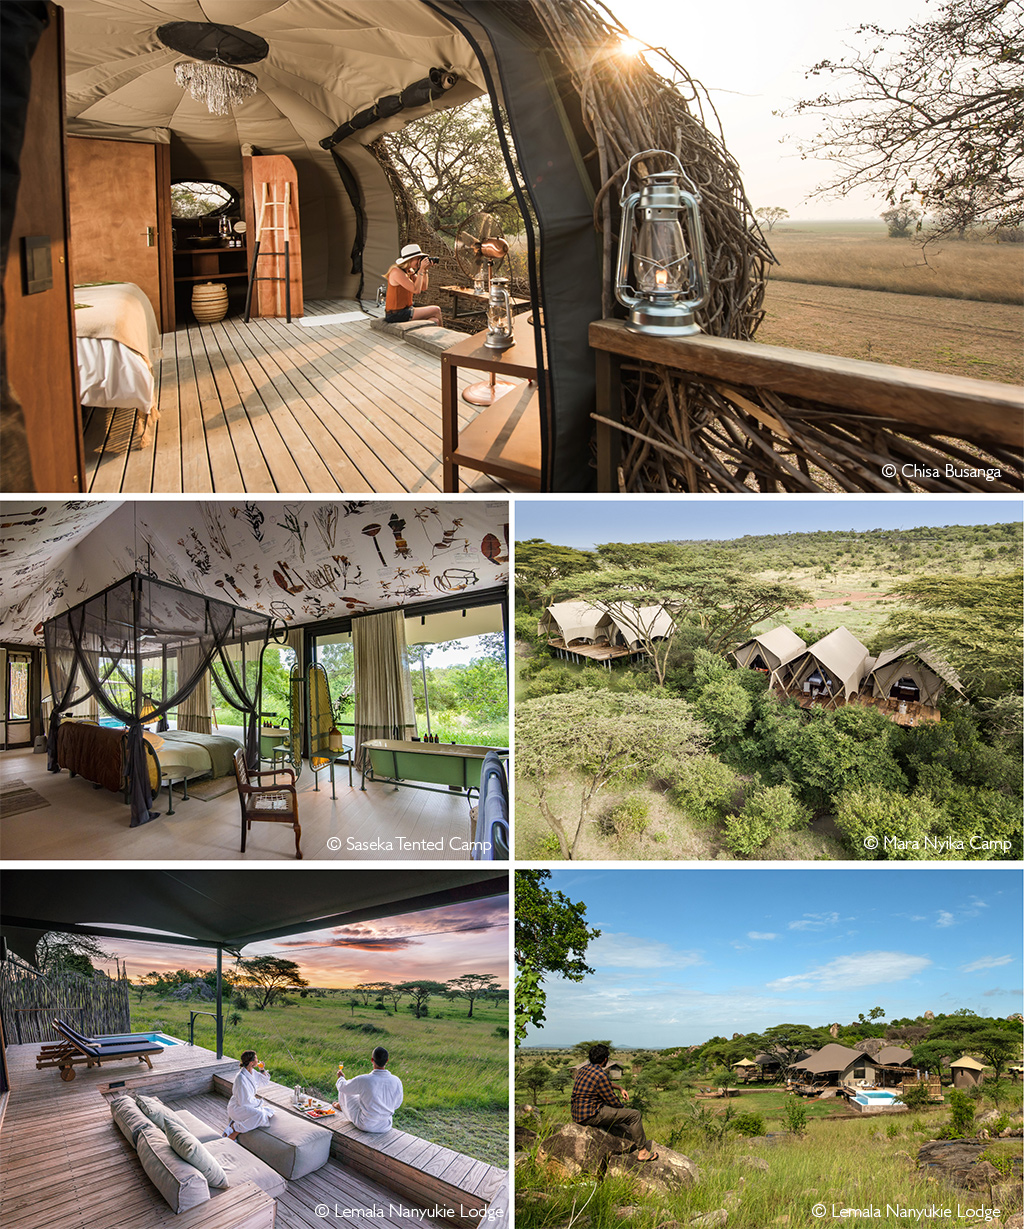 Tented camps